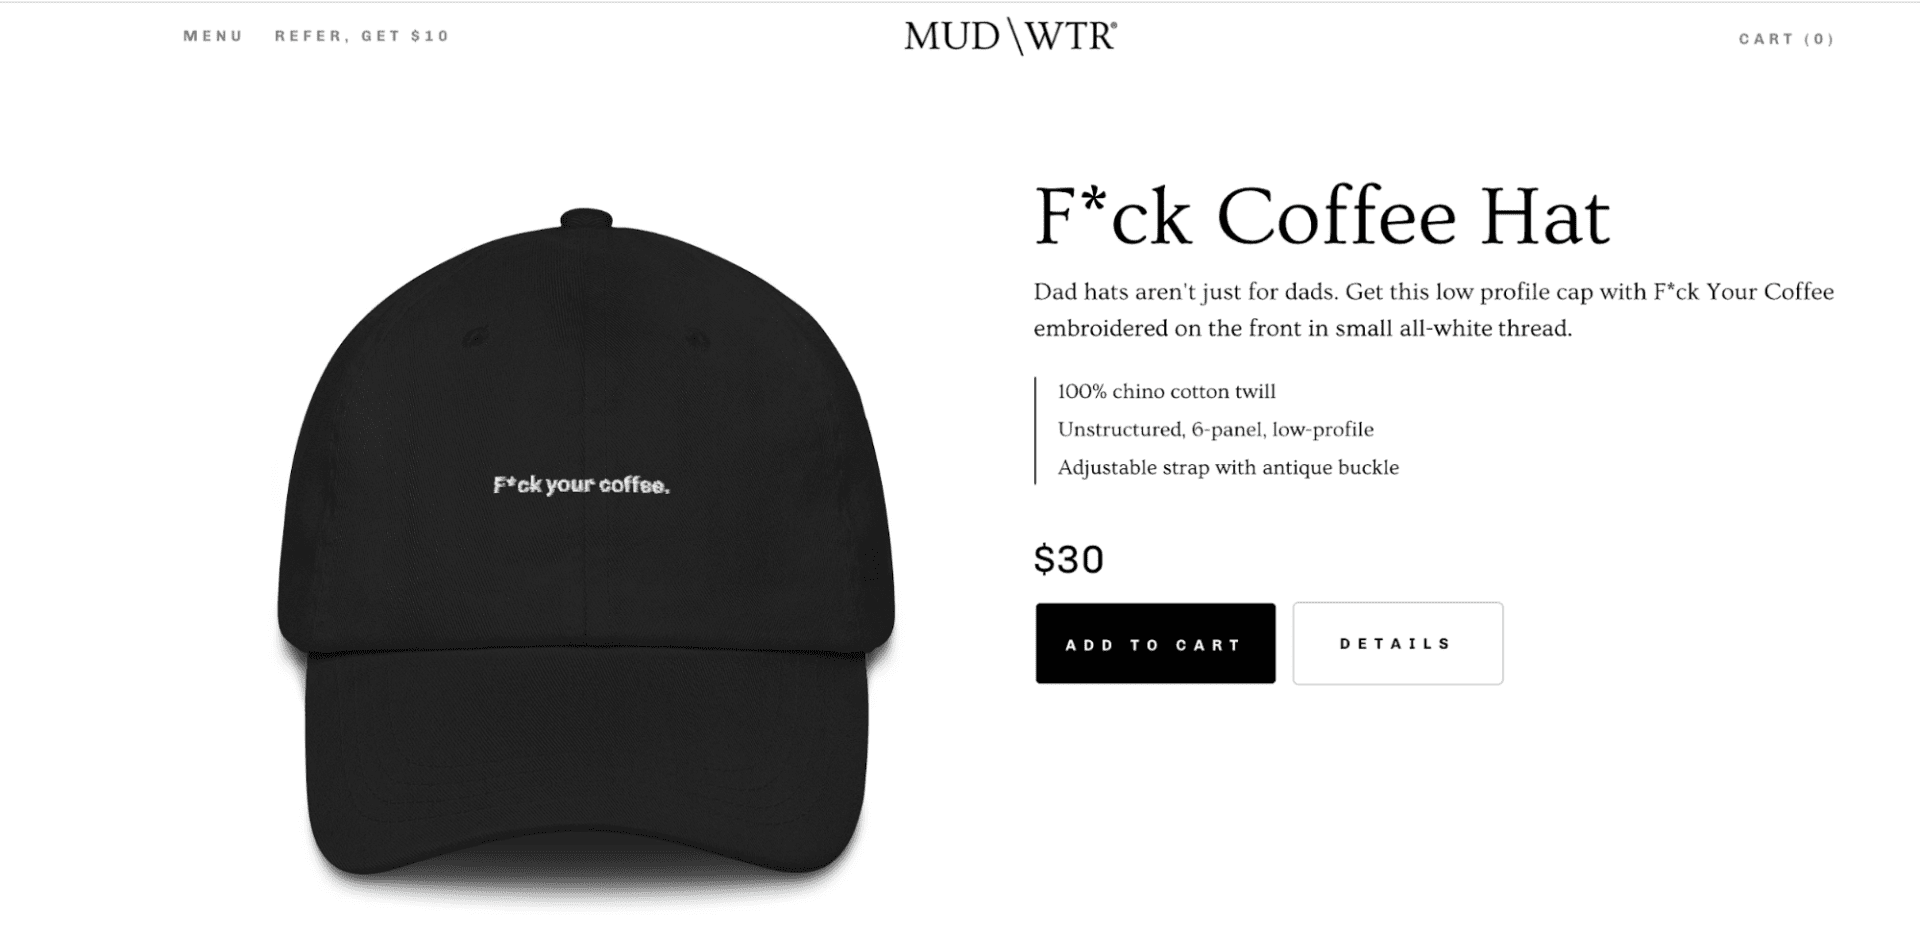 f*ck coffee hat from an ecommerce store as an example of being edgy